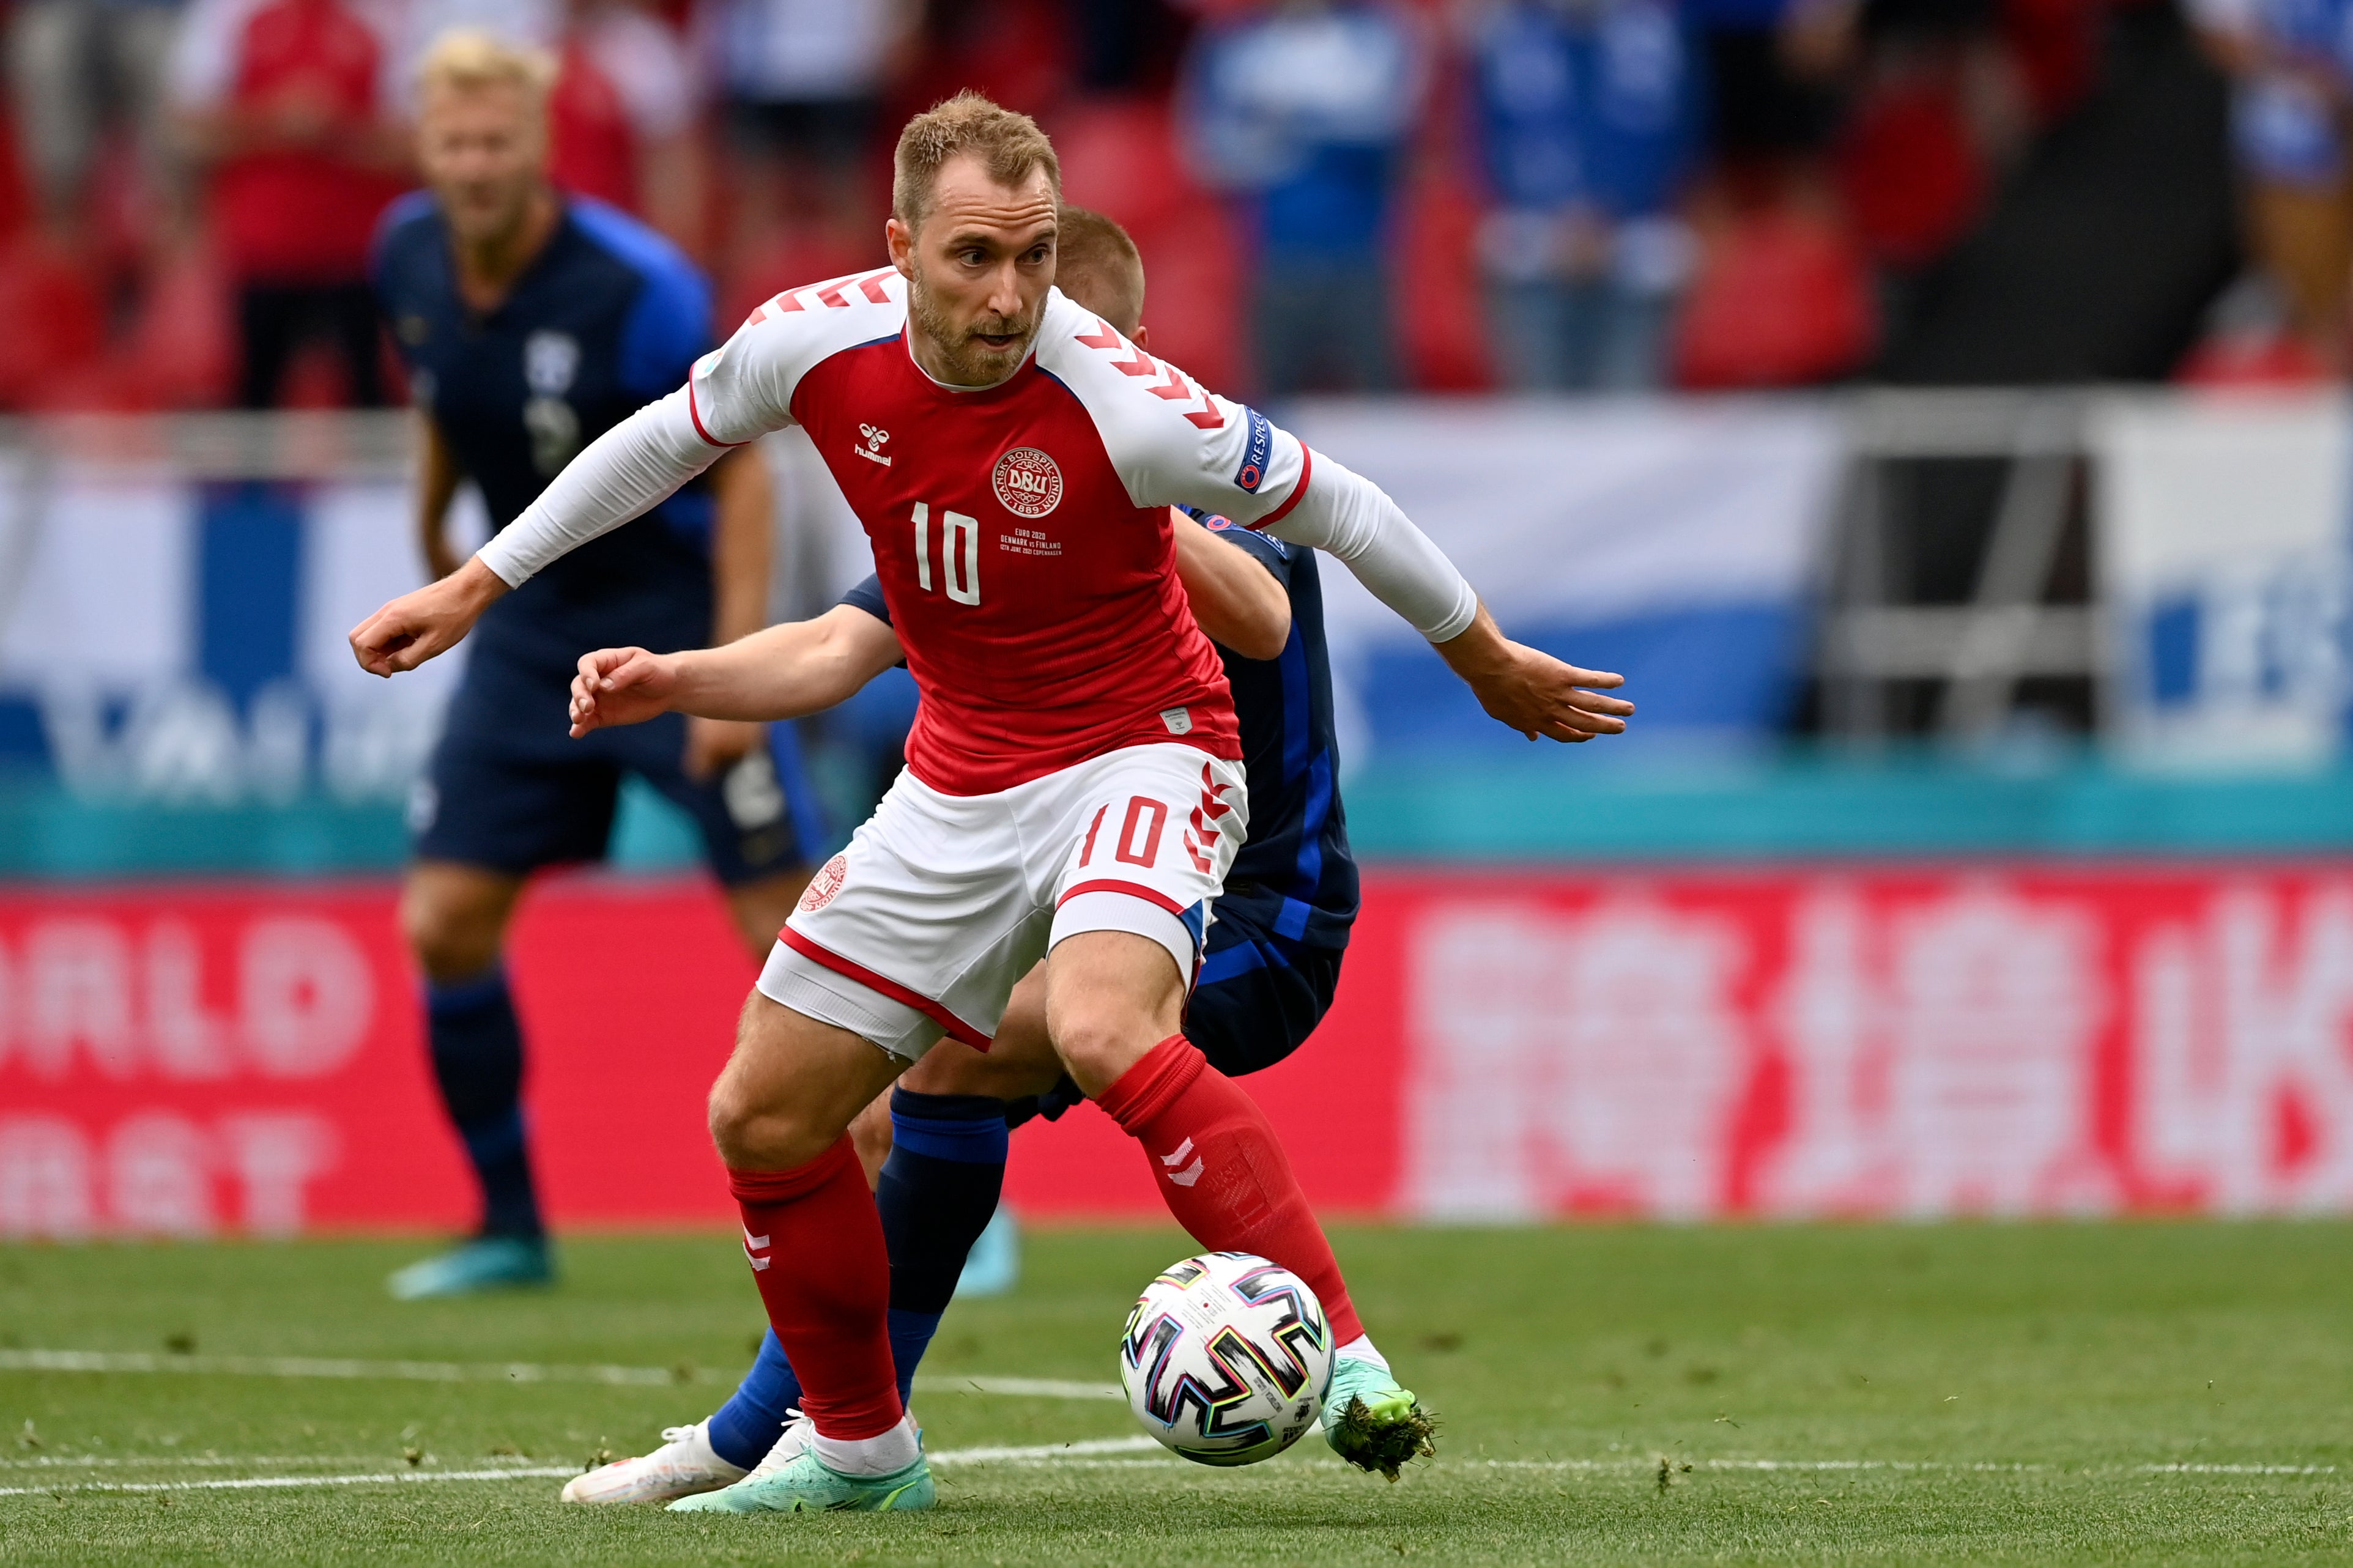 Denmark’s Christian Eriksen collapsed during his side's Euro 2020 match with Finland